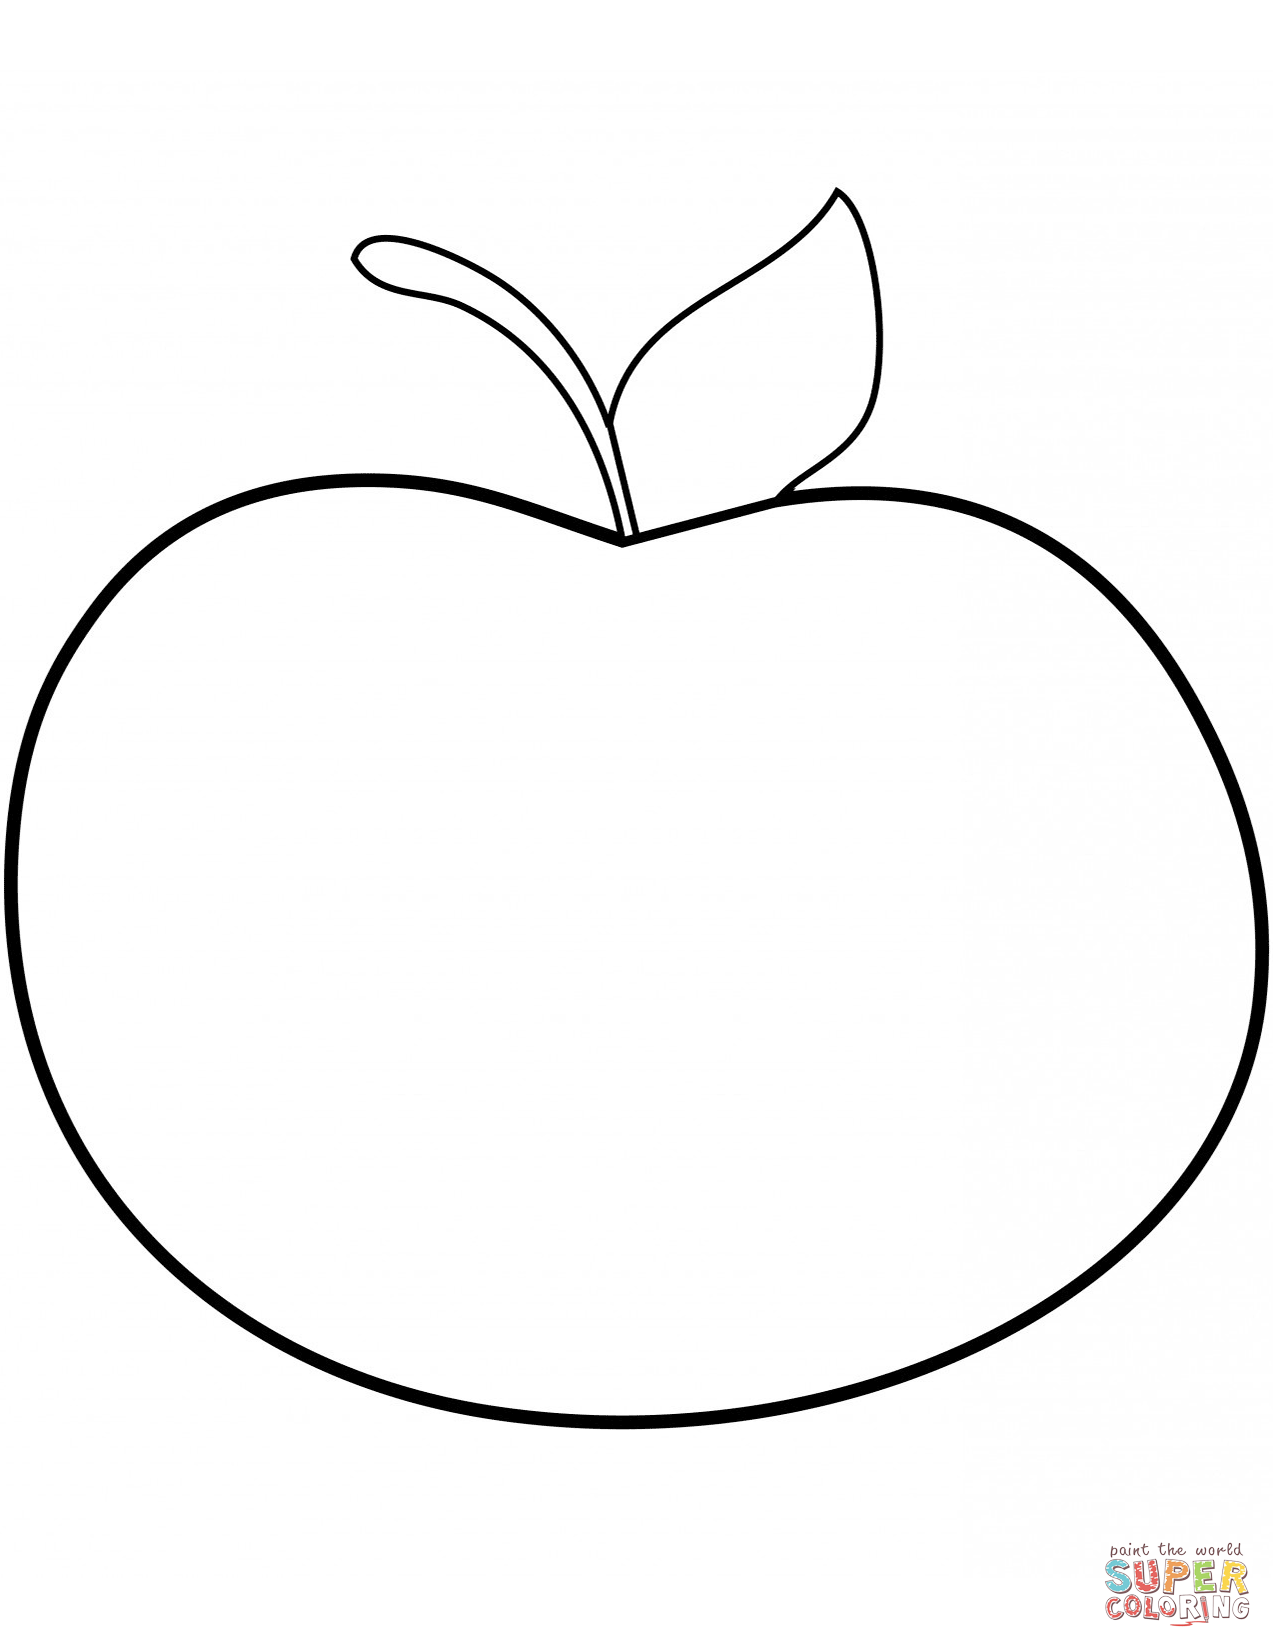 Apple Logo Coloring Pages at GetColorings.com | Free ...